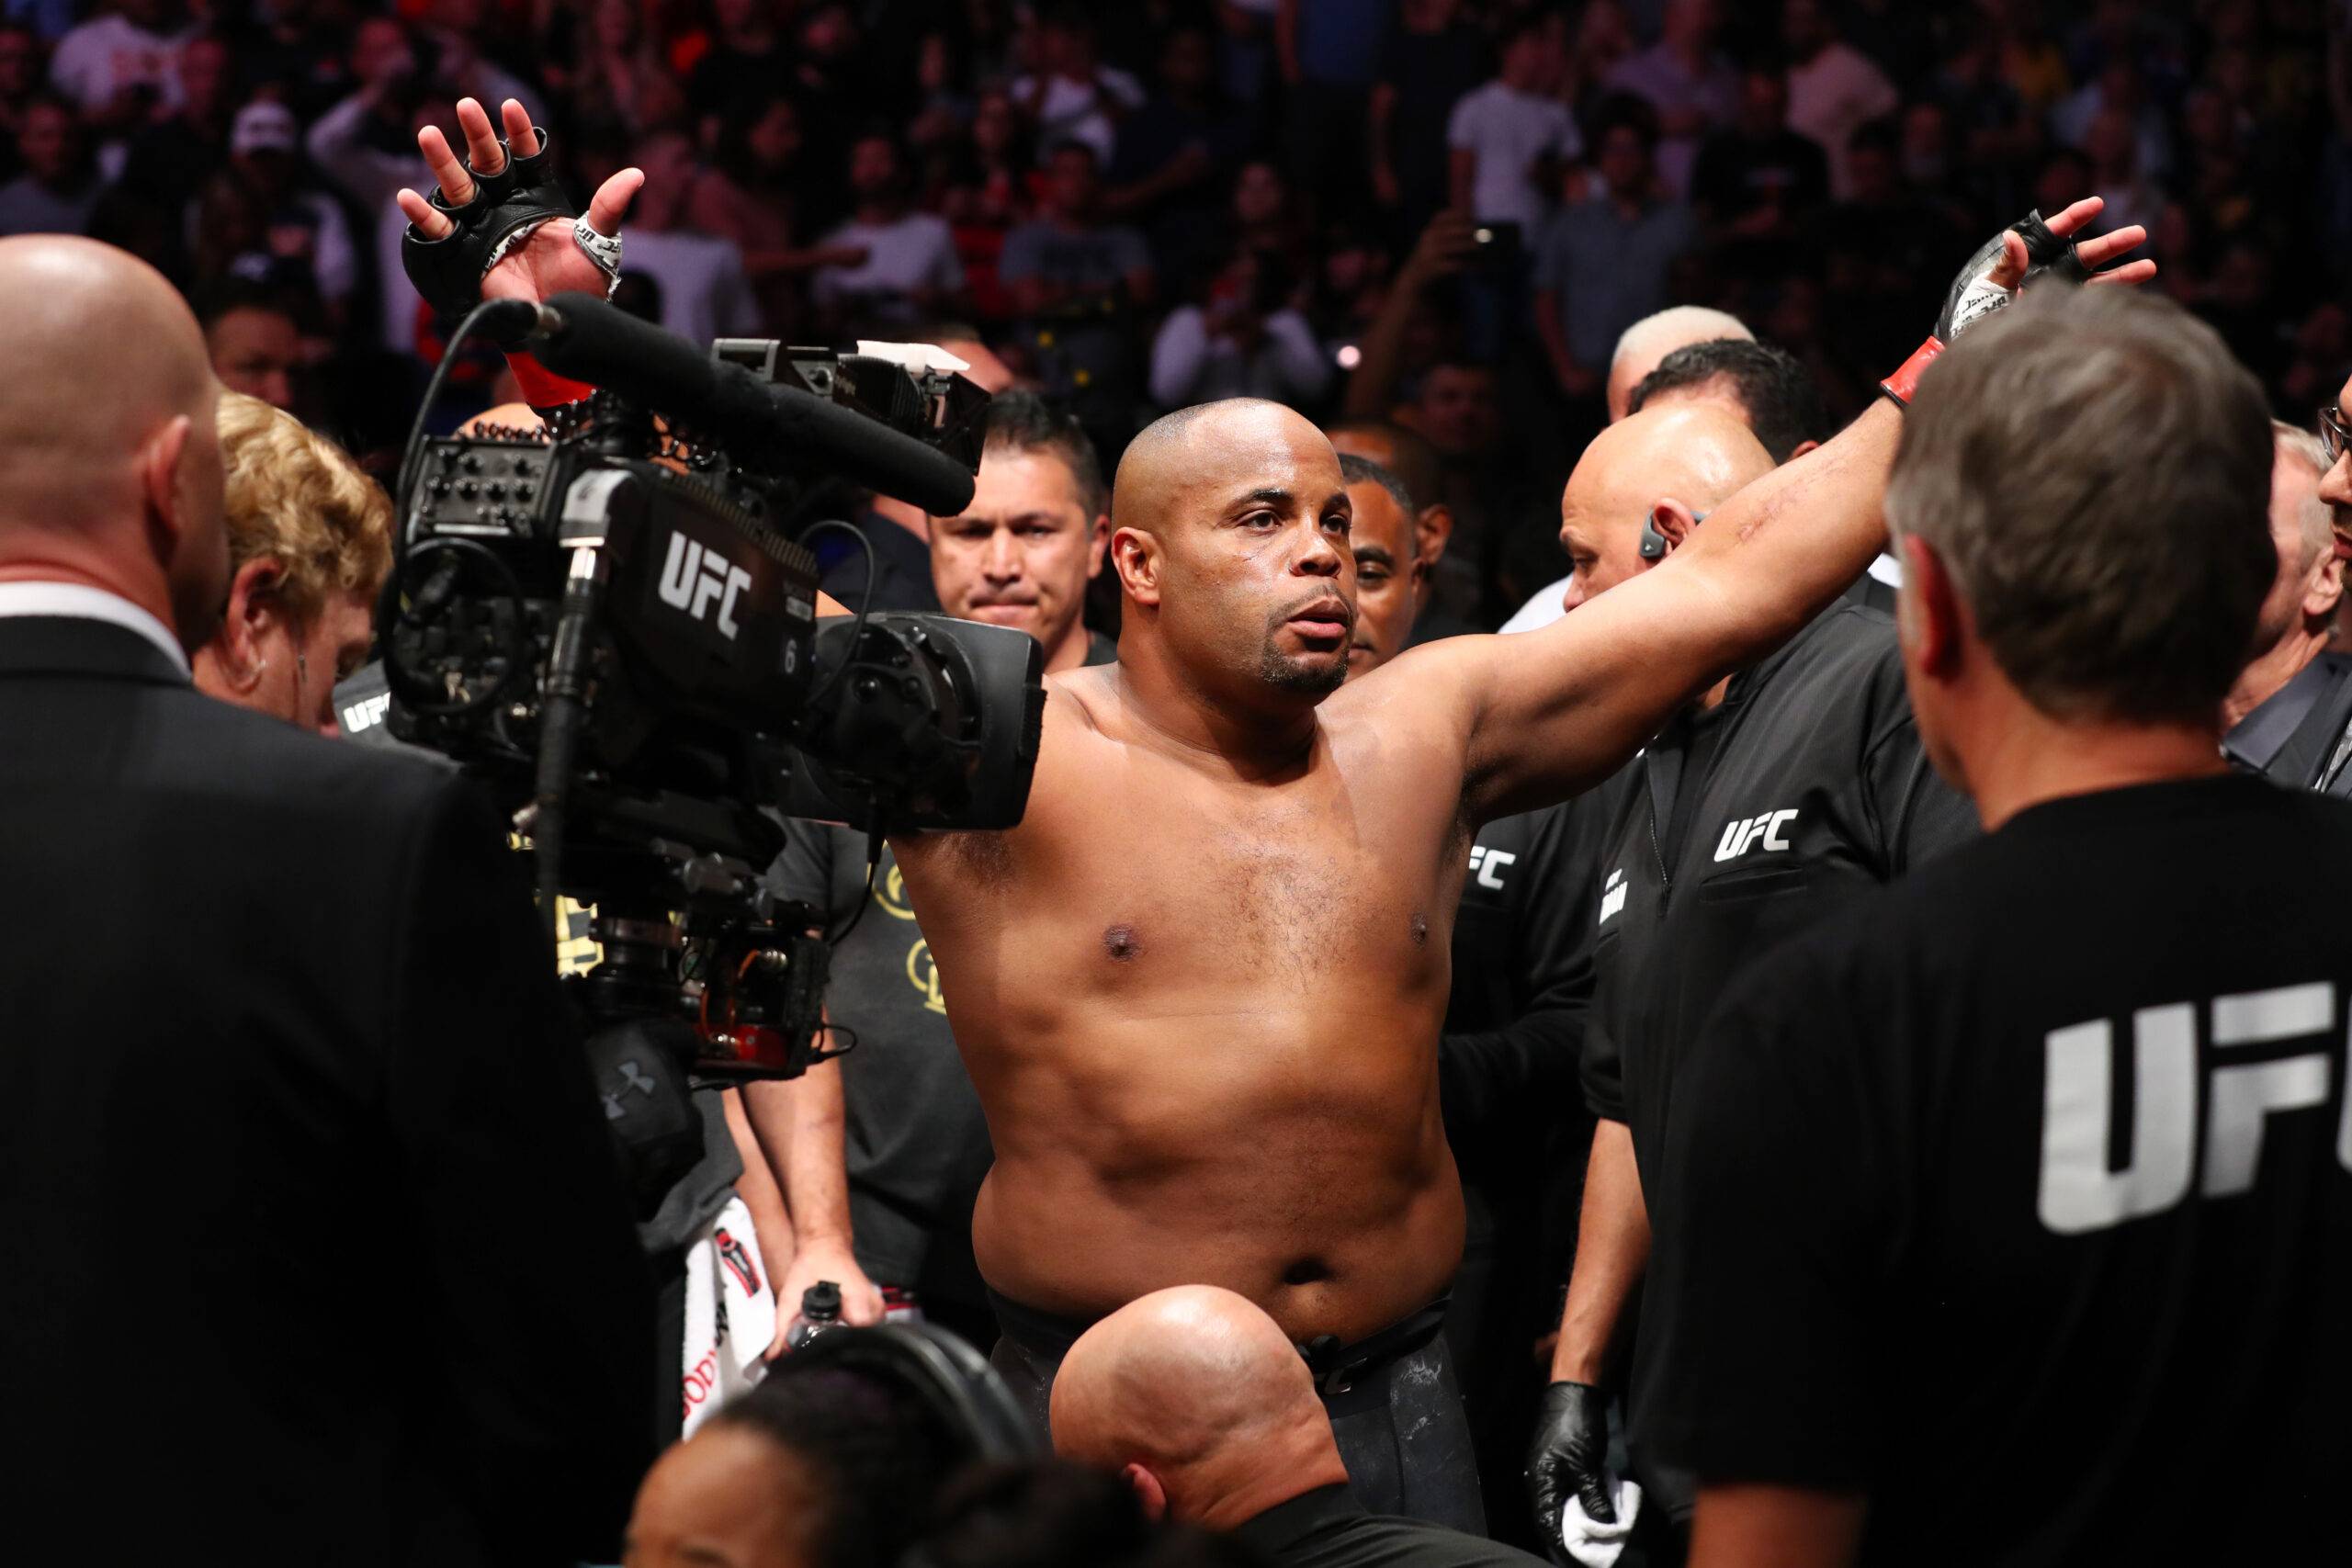 Daniel Cormier posing ahead of a fight in the UFC